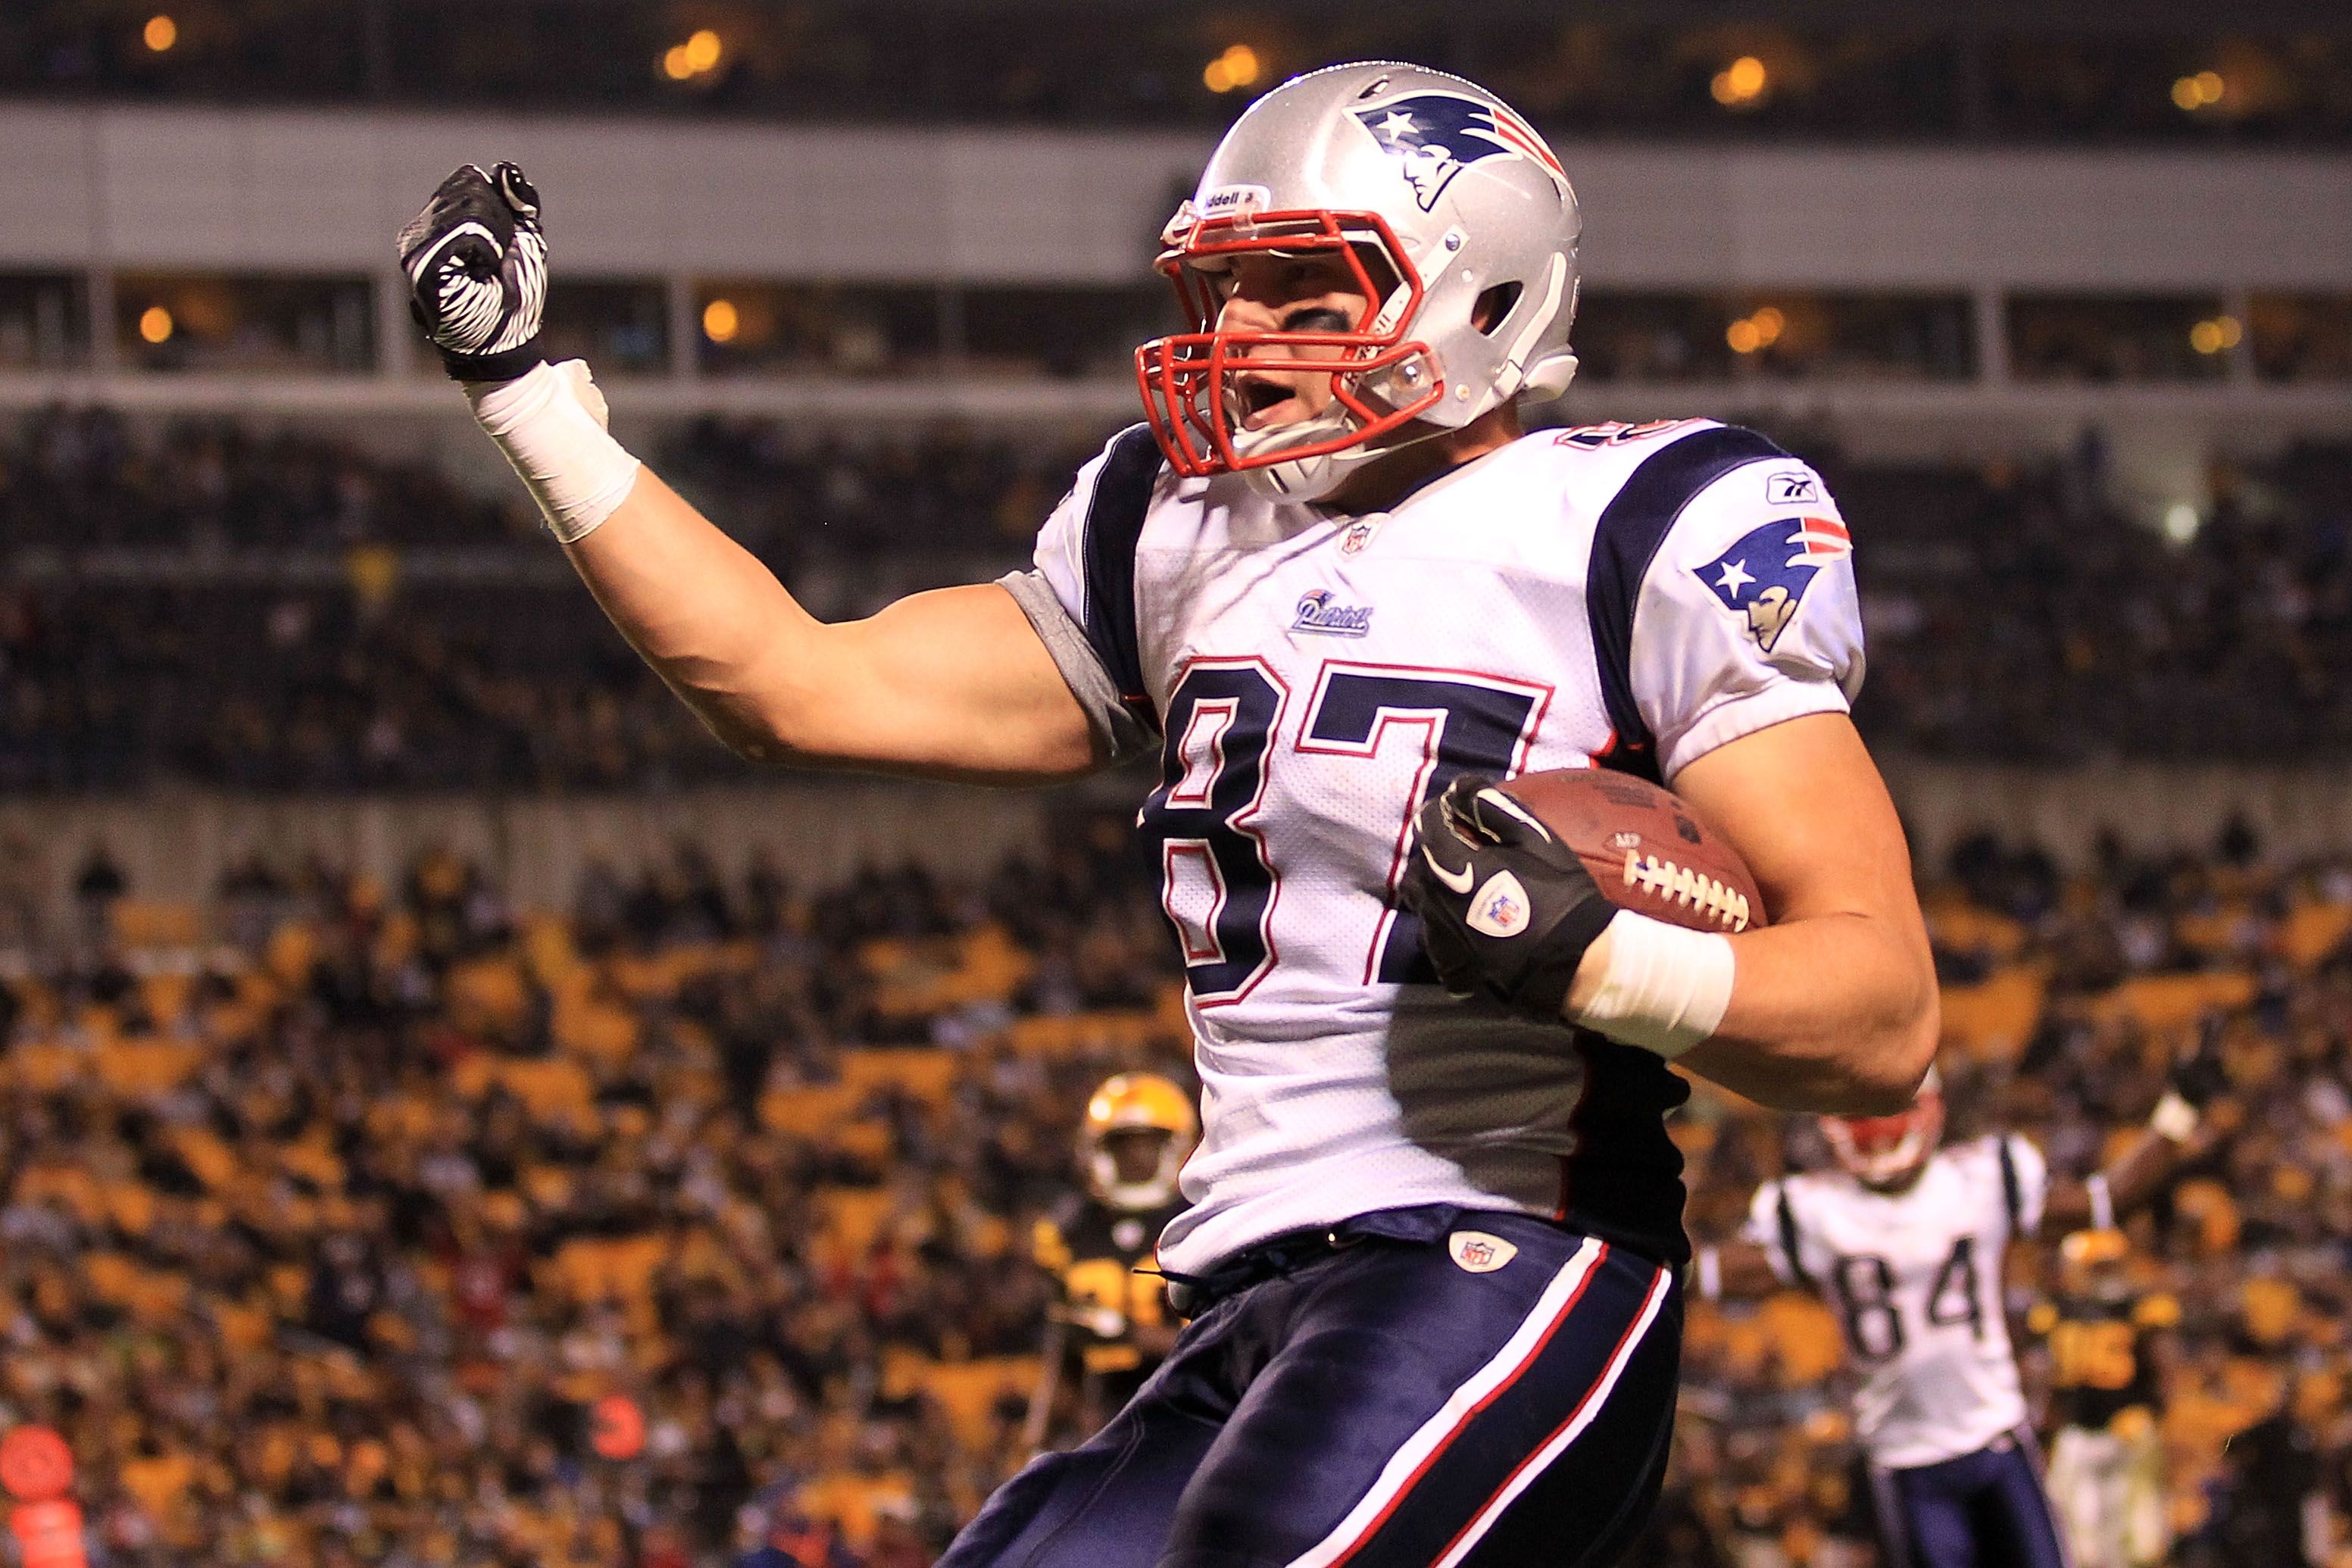 PITTSBURGH - NOVEMBER 14:  Rob Gronkowski #87 of the New England Patriots celebrates scoring a touchdown against the Pittsburgh Steelers on November 14, 2010 at Heinz Field in Pittsburgh, Pennsylvania.  (Photo by Chris McGrath/Getty Images)